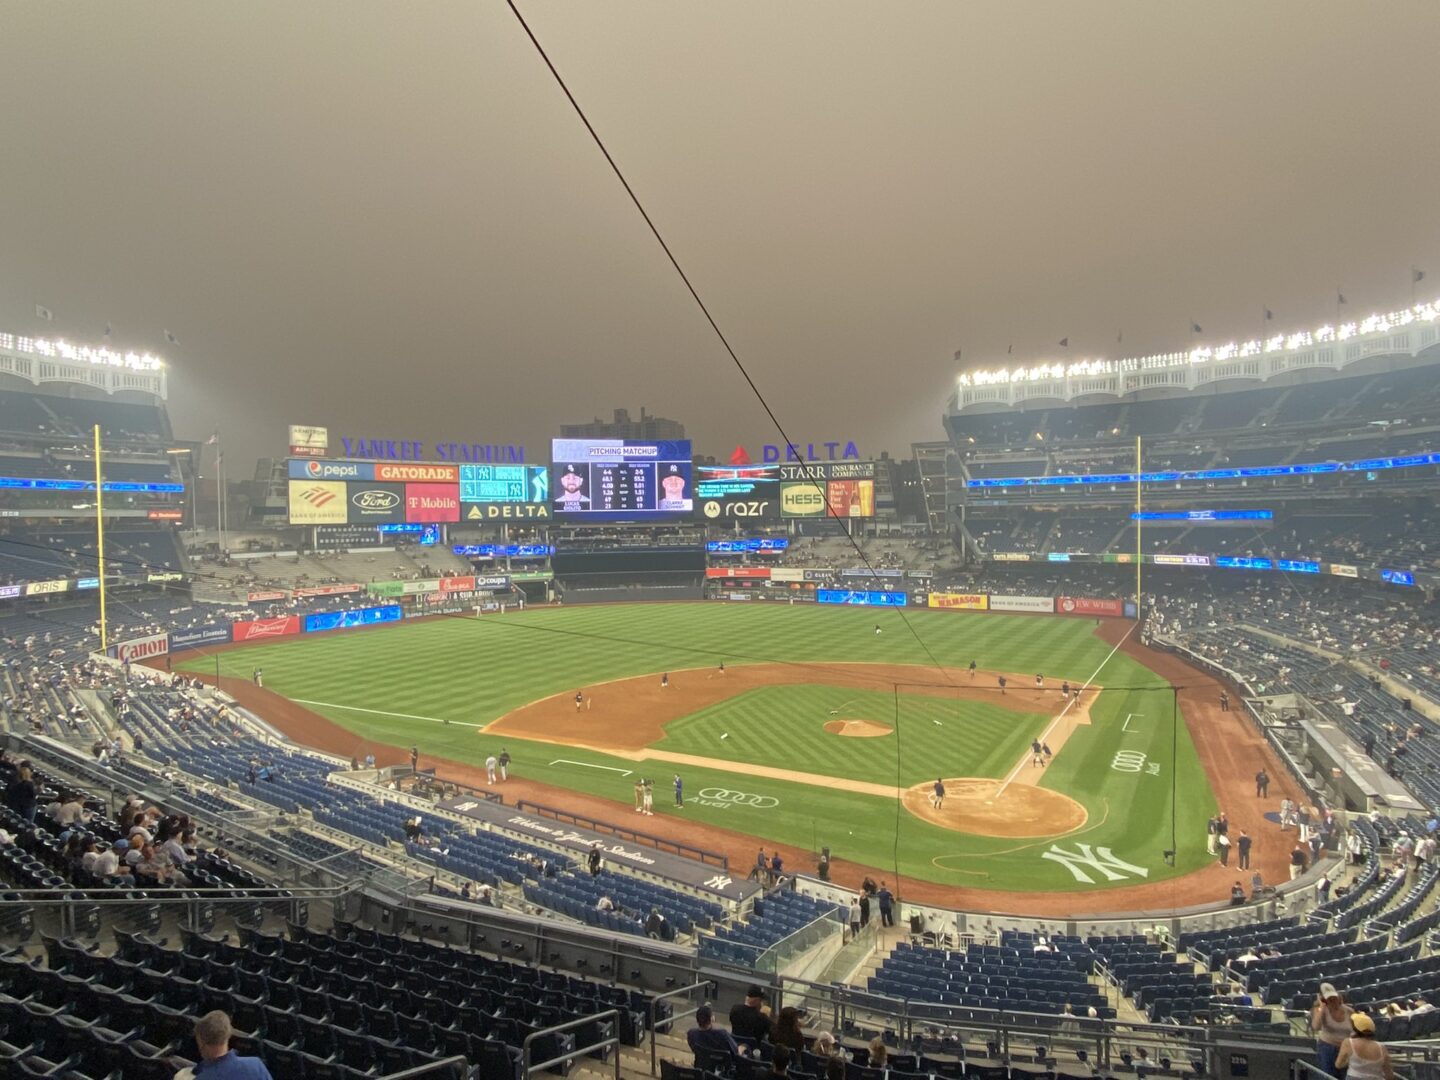 View of a baseball field from the stands with smoky air.